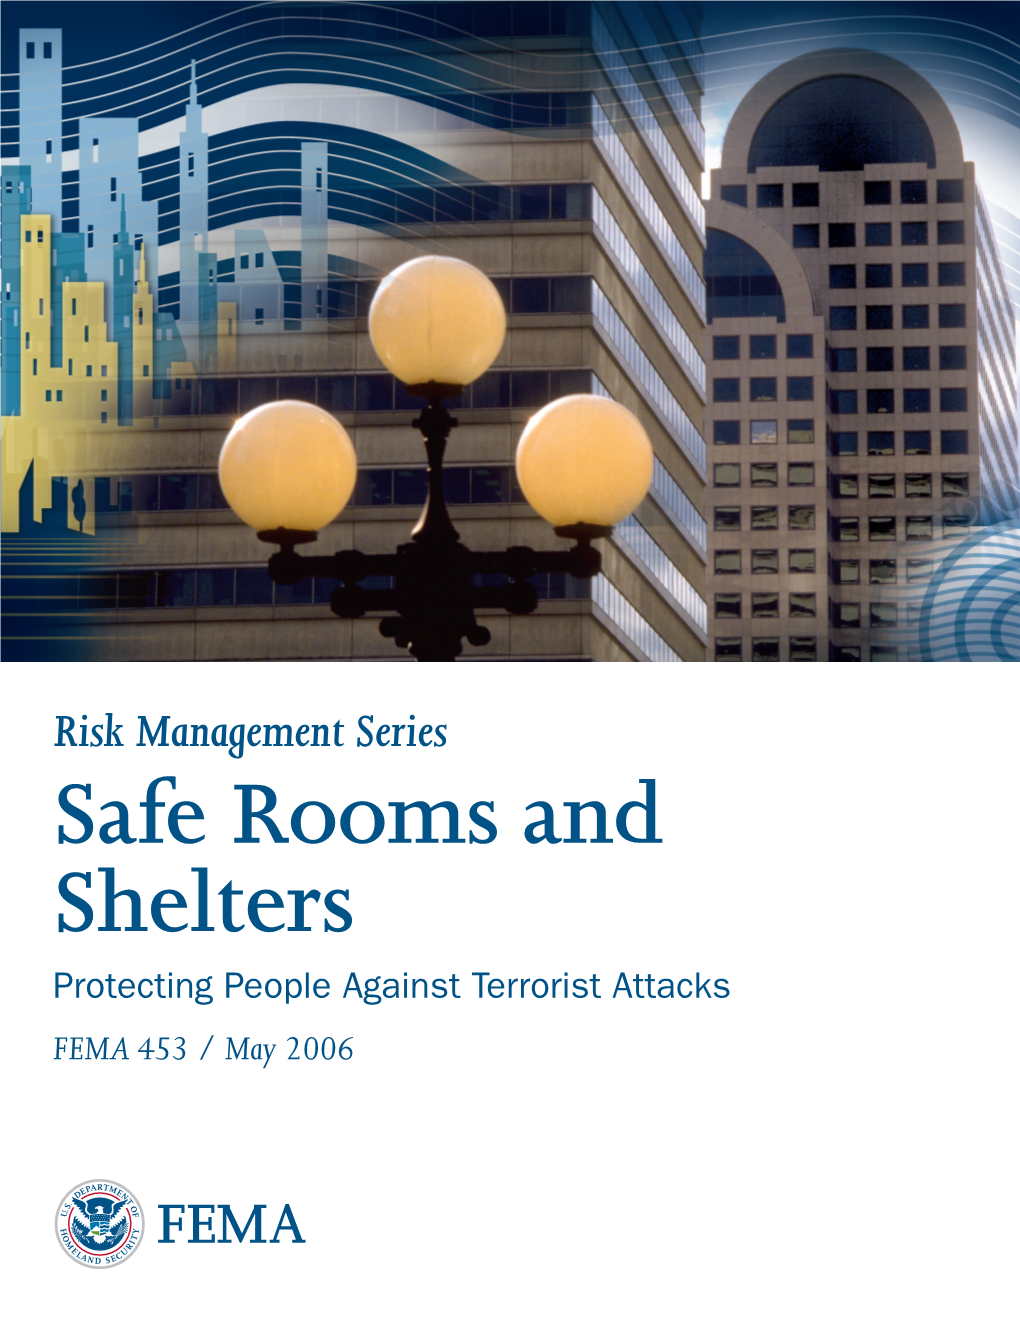 Risk Management Series Safe Rooms and Shelters Protecting People Against Terrorist Attacks FEMA 453 / May 2006